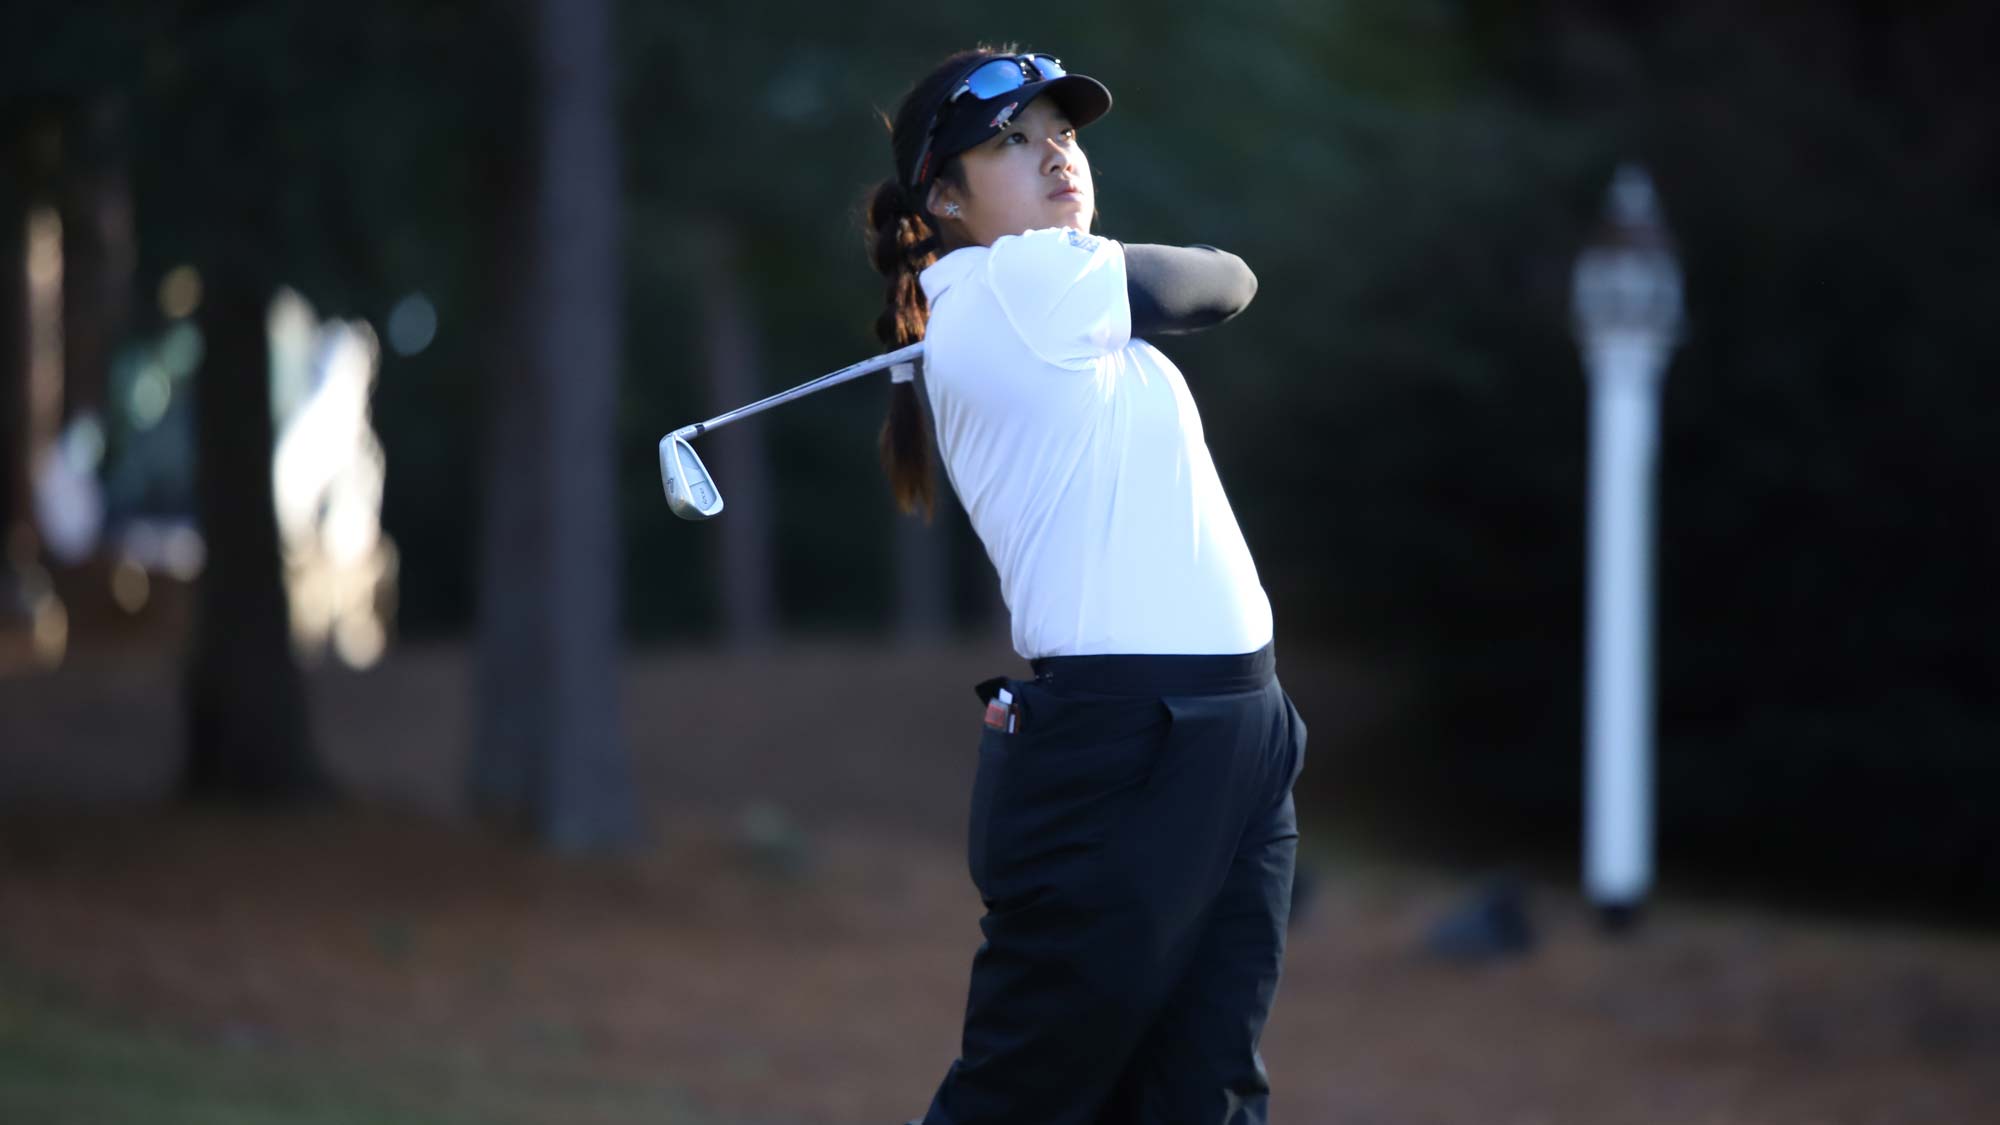 Jaclyn Lee during the 4th round of the LPGA Q-Series